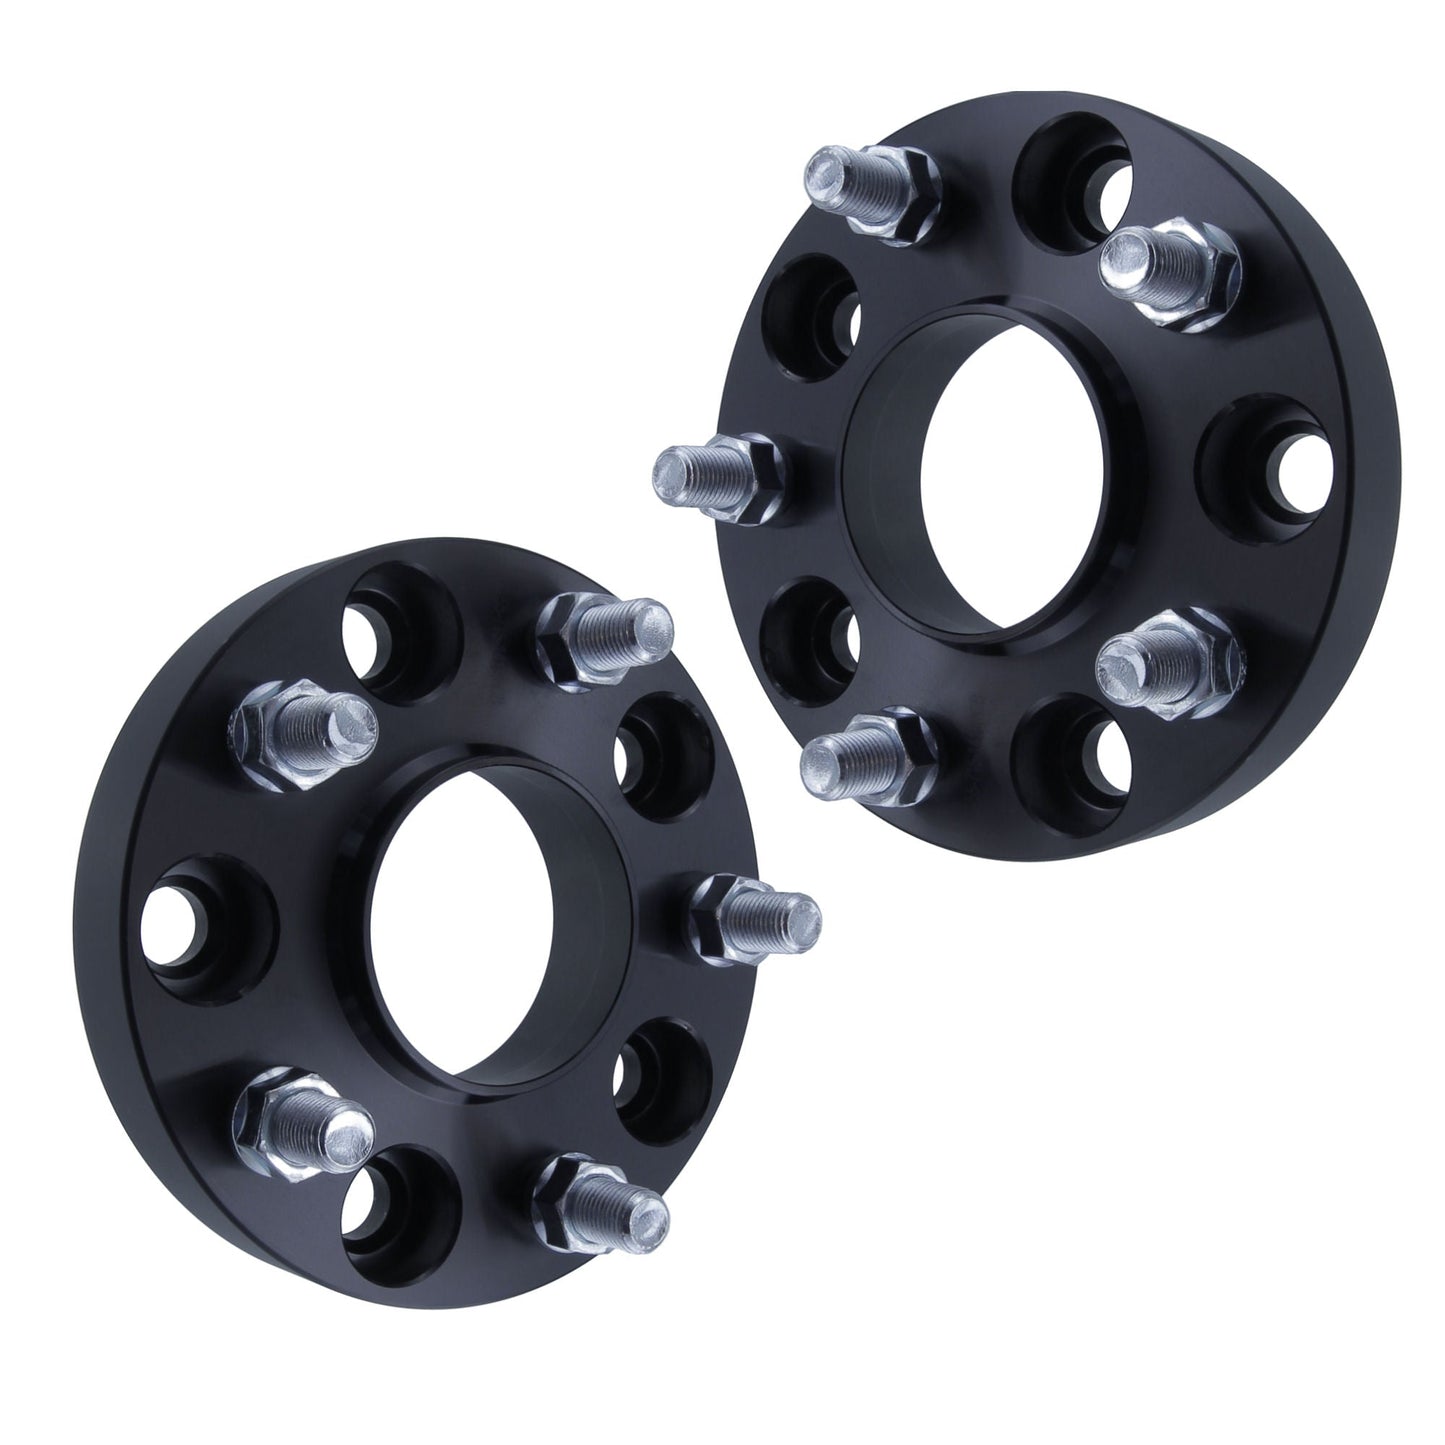 1.5" Titan Wheel Spacers for Jeep Grand Cherokee Wrangler |5x5 | 71.5 Hubcentric |14x1.5 Studs | Set of 4 | Titan Wheel Accessories